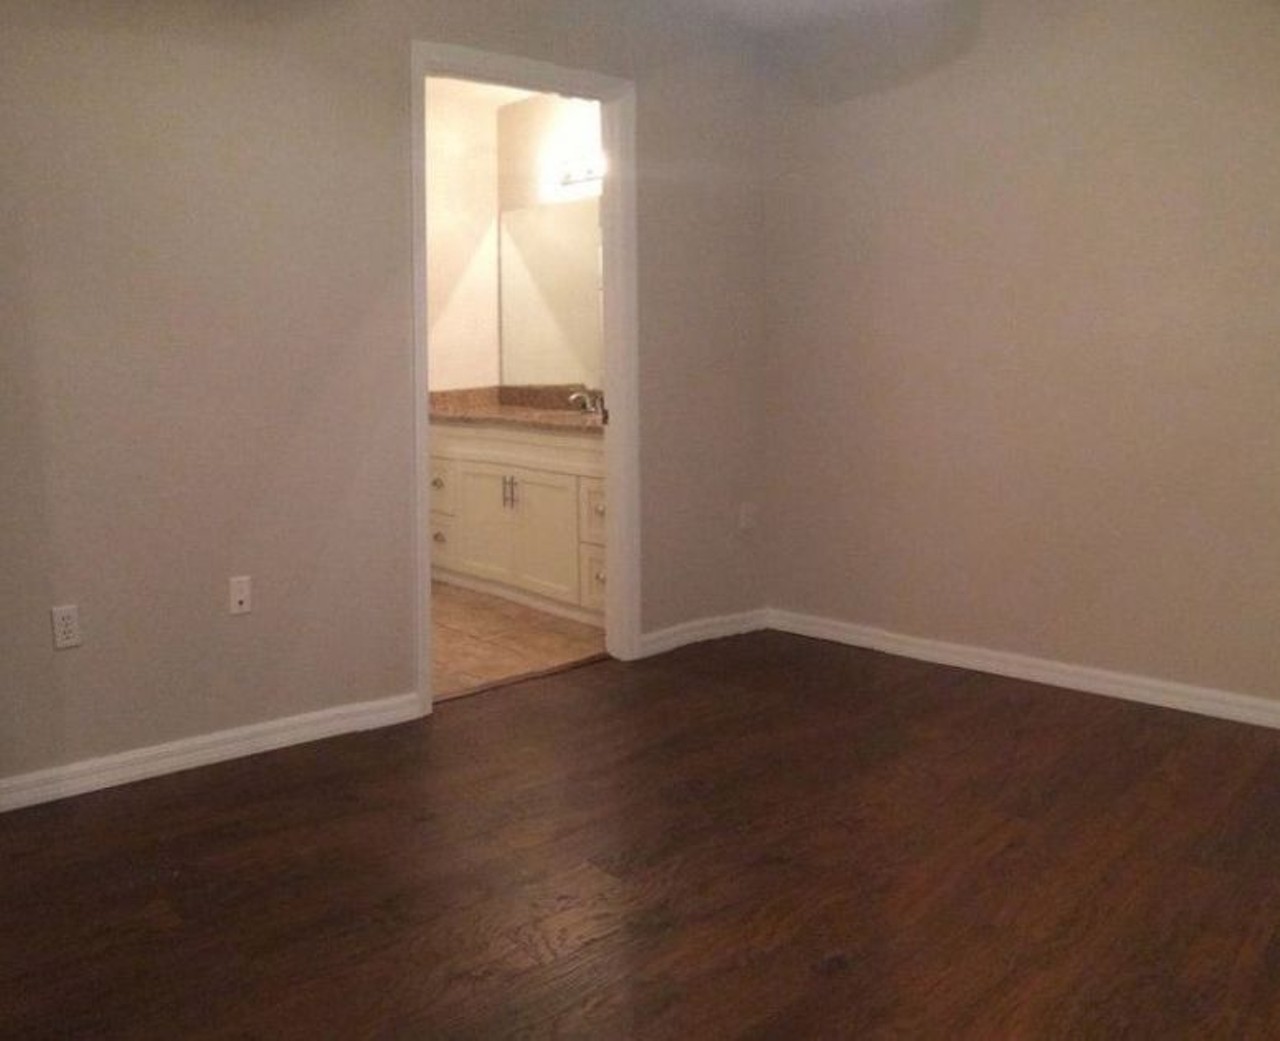 City St, Orlando
$1,225/mo
1 bed, 1 bath, 829 sqft
This large master bedroom is attached to the master bath that has recently been renovated.